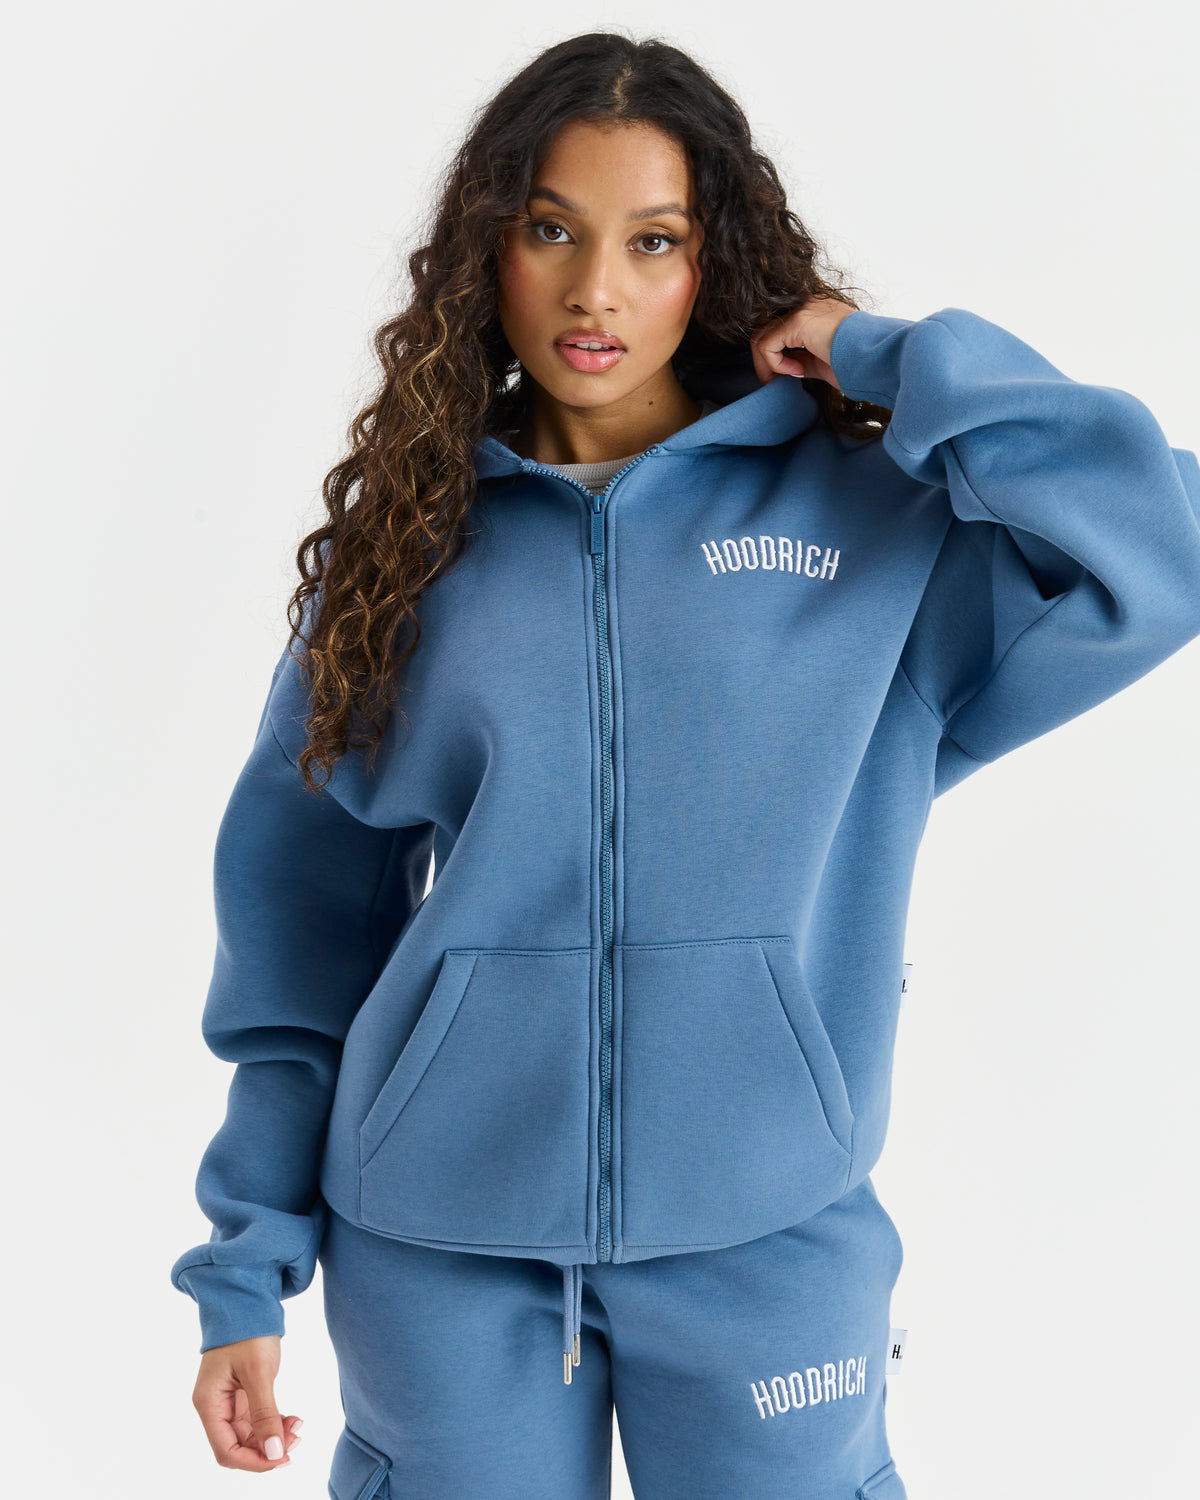 Active Sets Fashion Women Track Suits Sports Wear Jogging Suits Ladies  Hooded Tracksuit Set Clothes Hoodies+Sweatpants Sweat SuitsL231007 From  Bingcoholnciaga, $9.46